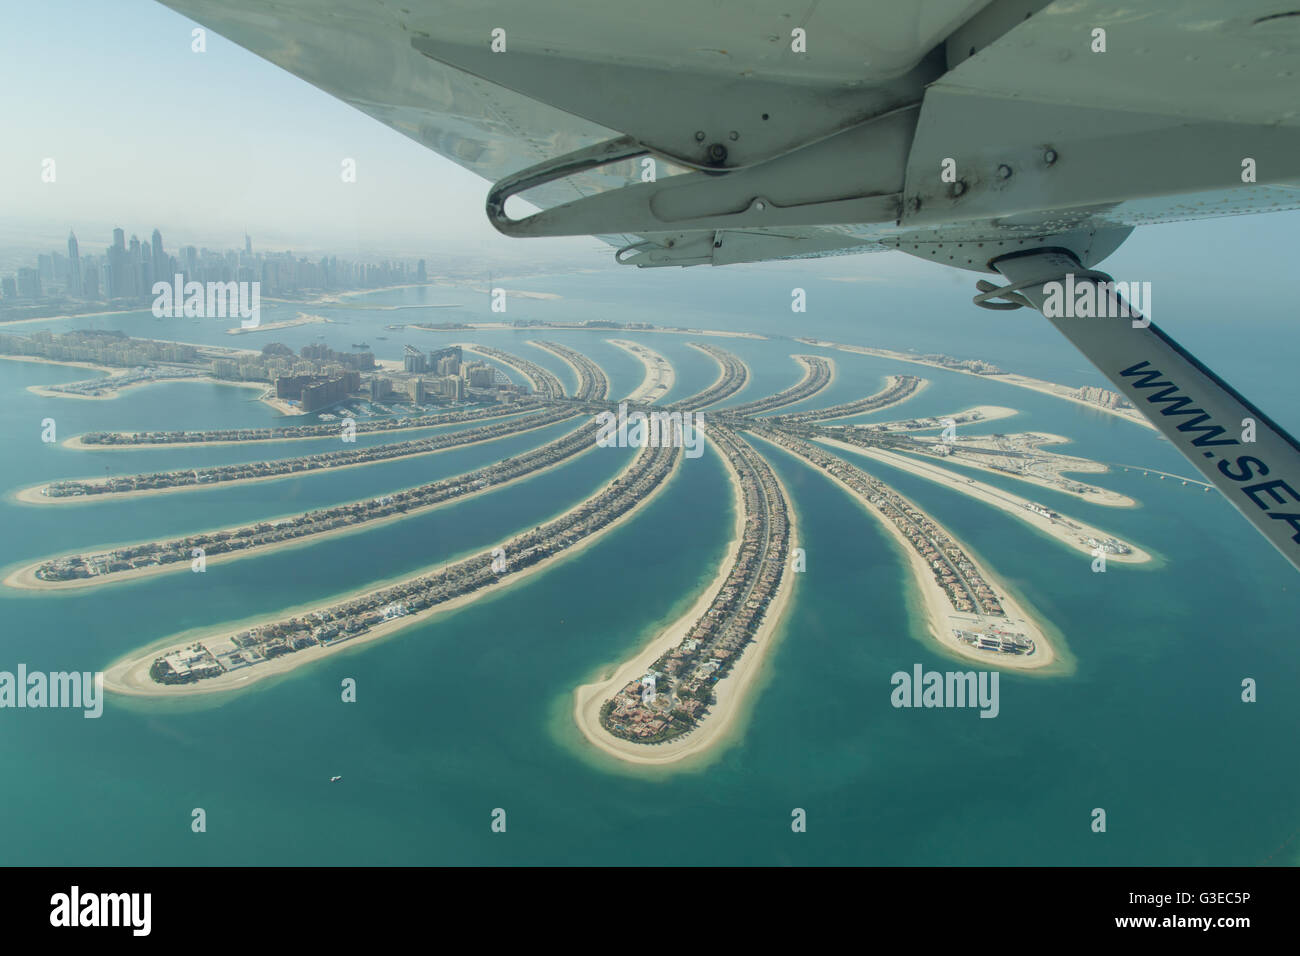 Dubai, United Arab Emirates - October 17, 2014: Aerial view of the artificial island Palm Jumeirah from a seaplane. Stock Photo